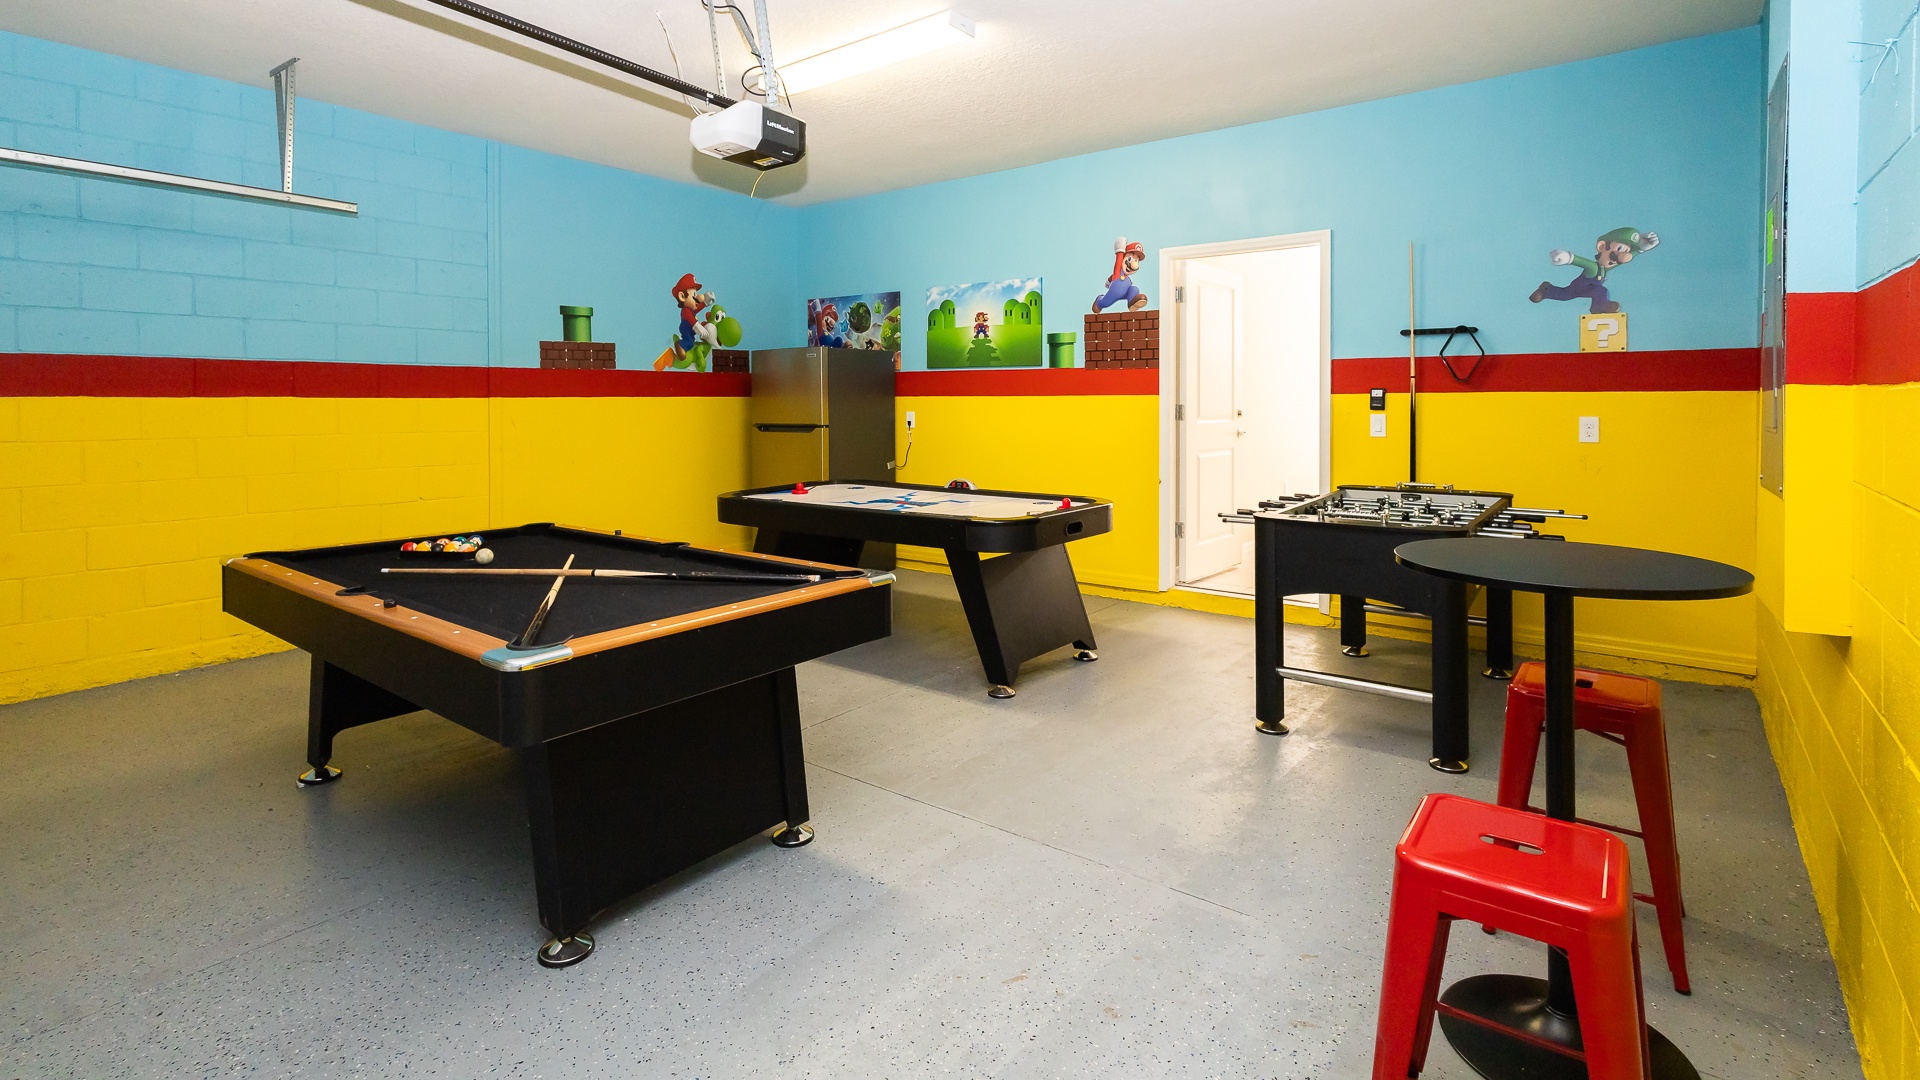 Get competitive in the garage game room with pool, air hockey, & foosball